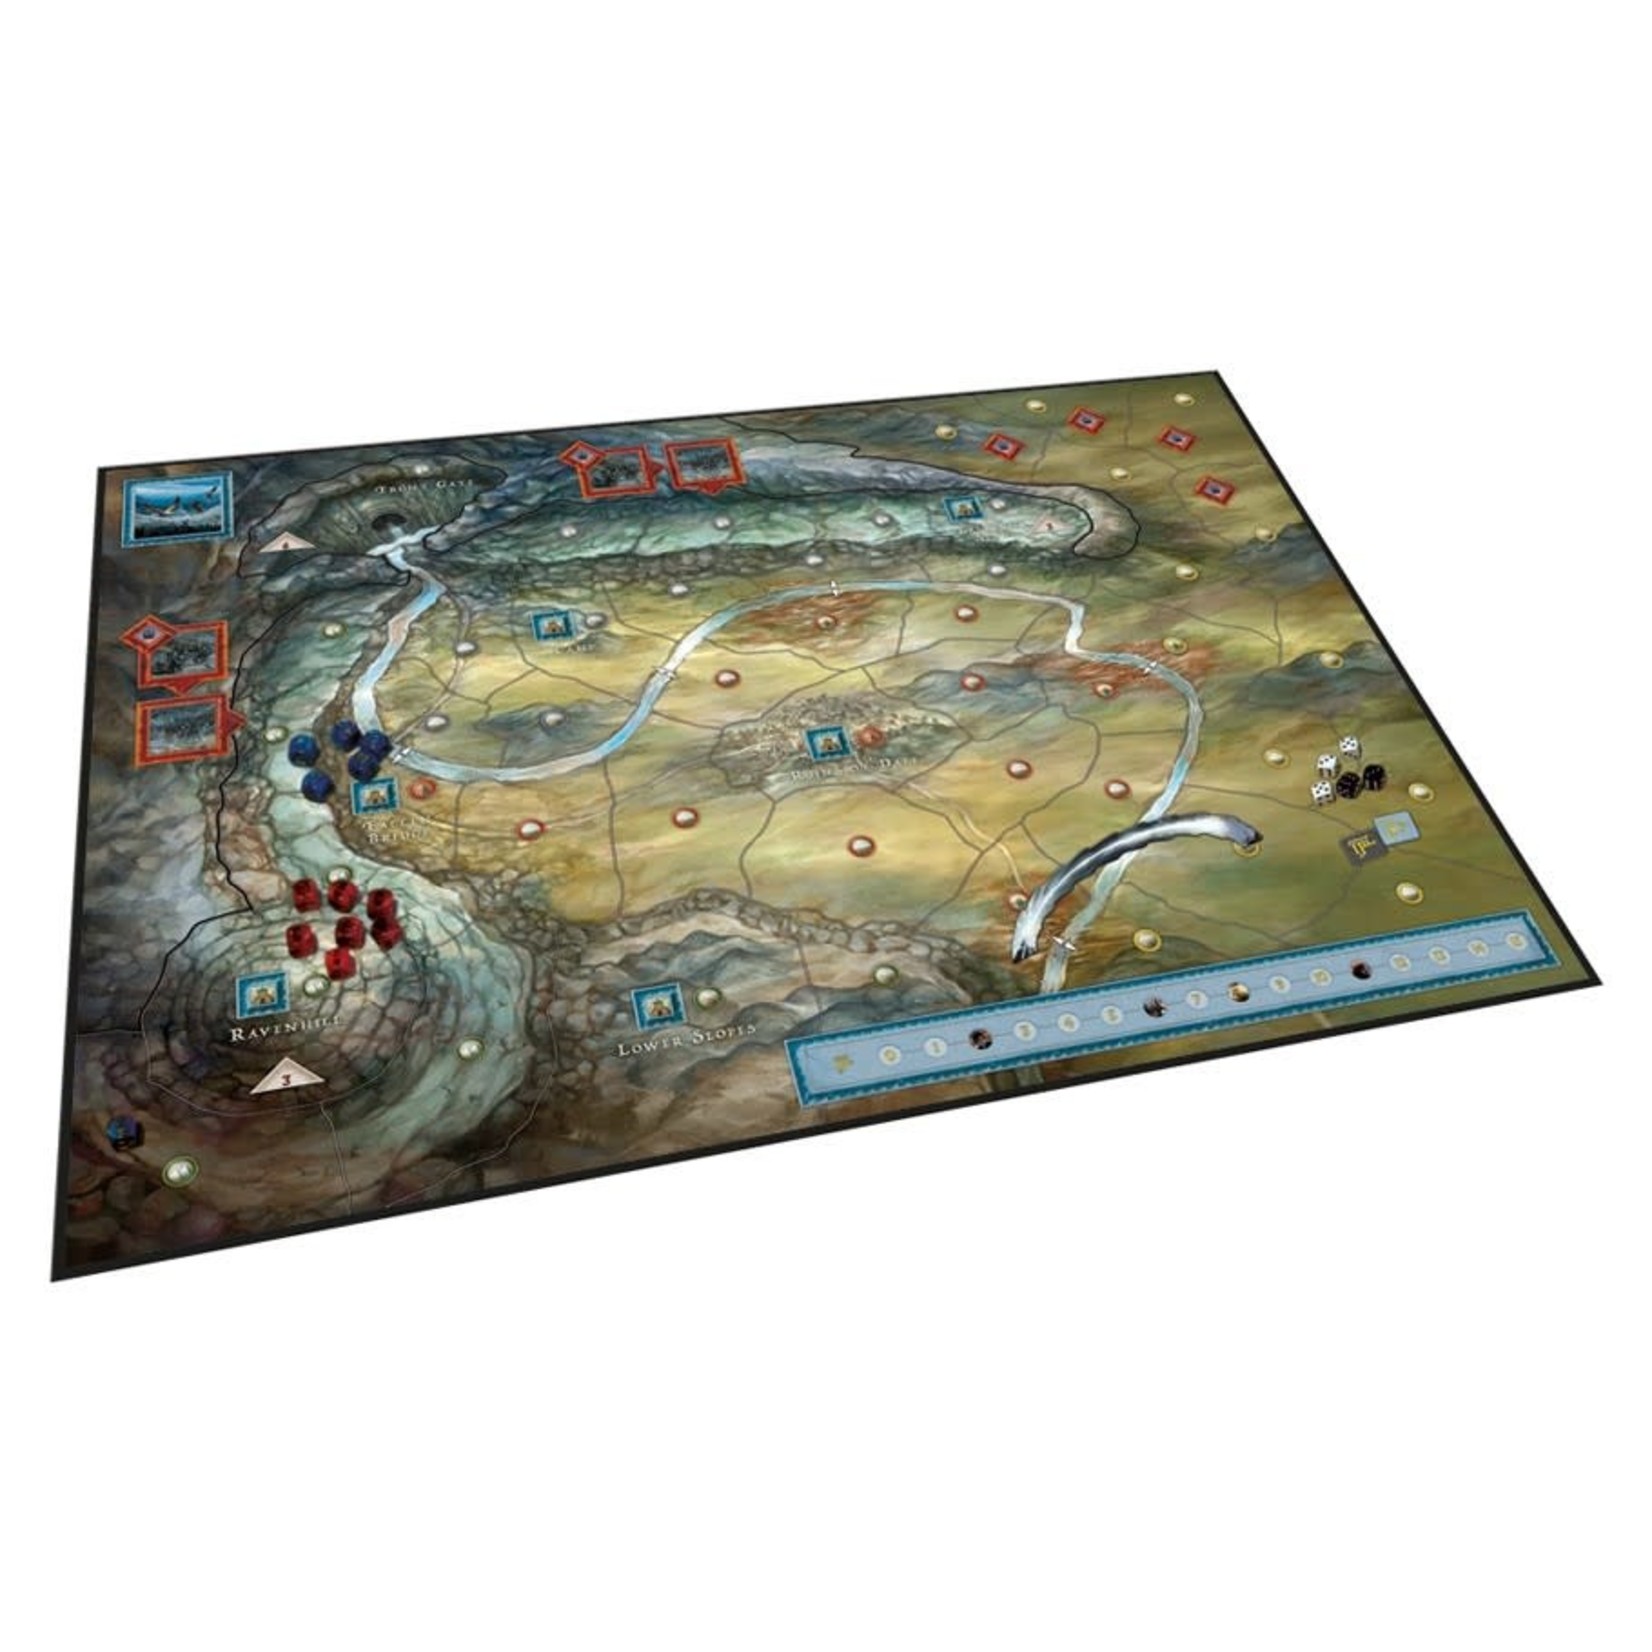 Ares Games LotR: War of the Ring: Battle of Five Armies